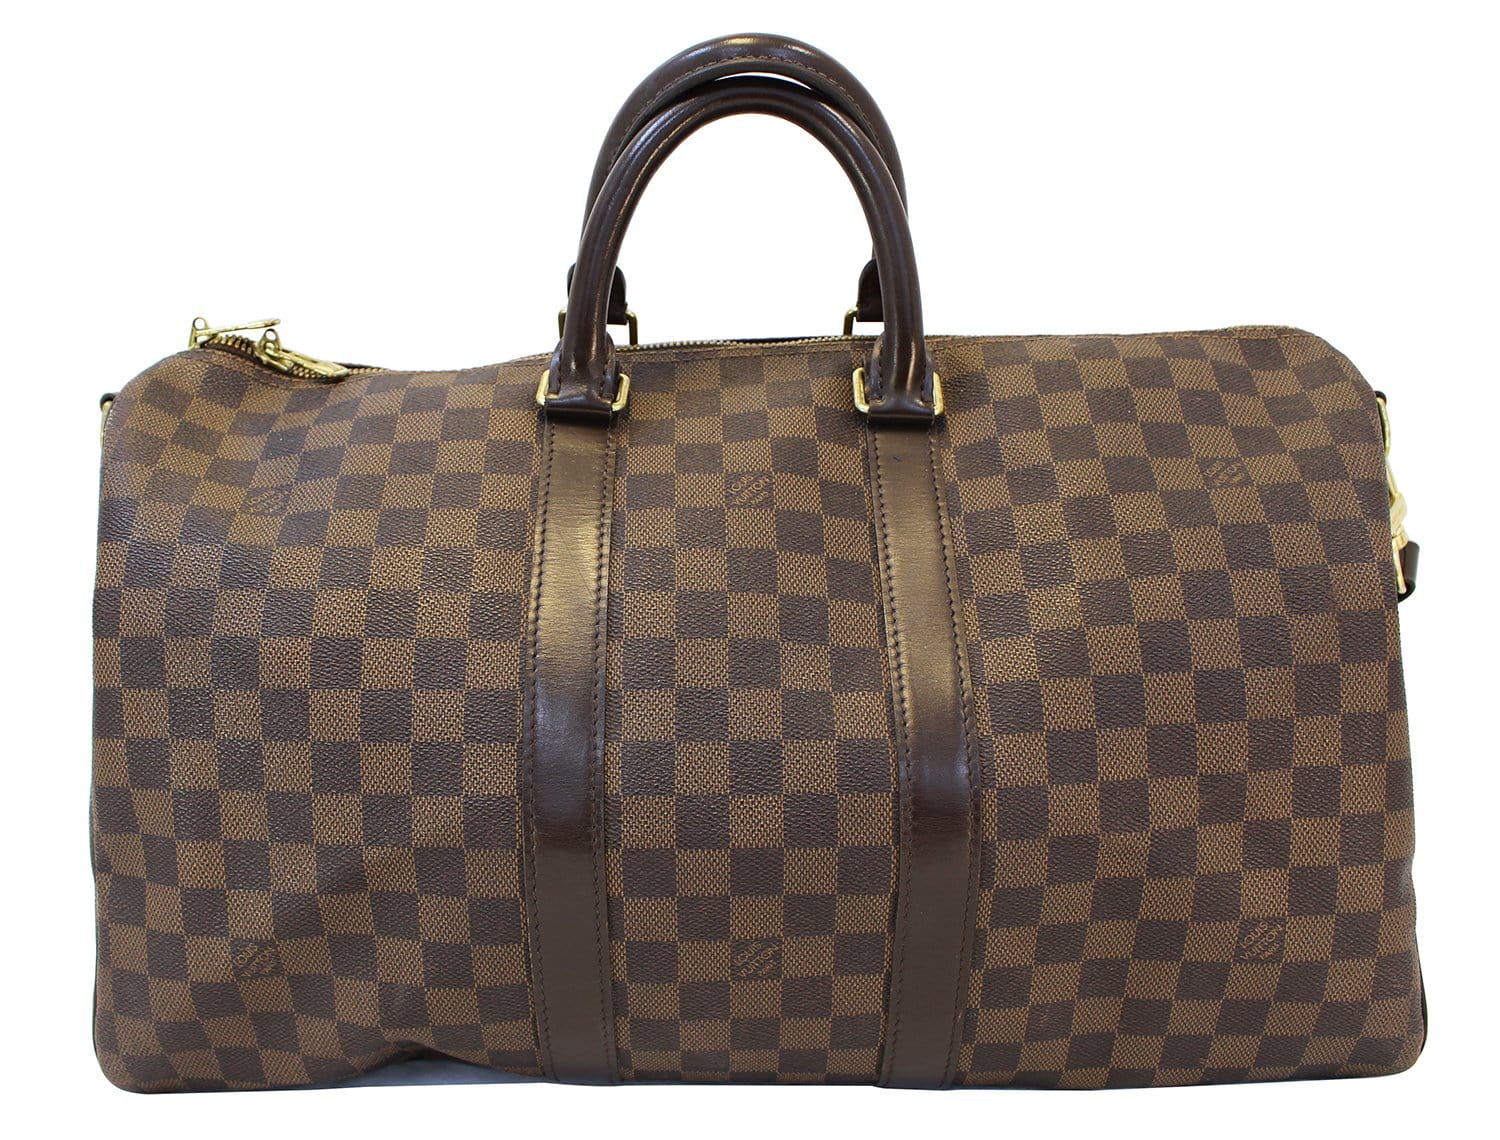 WATCH THIS BEFORE BUYING THE LV KEEPALL 45